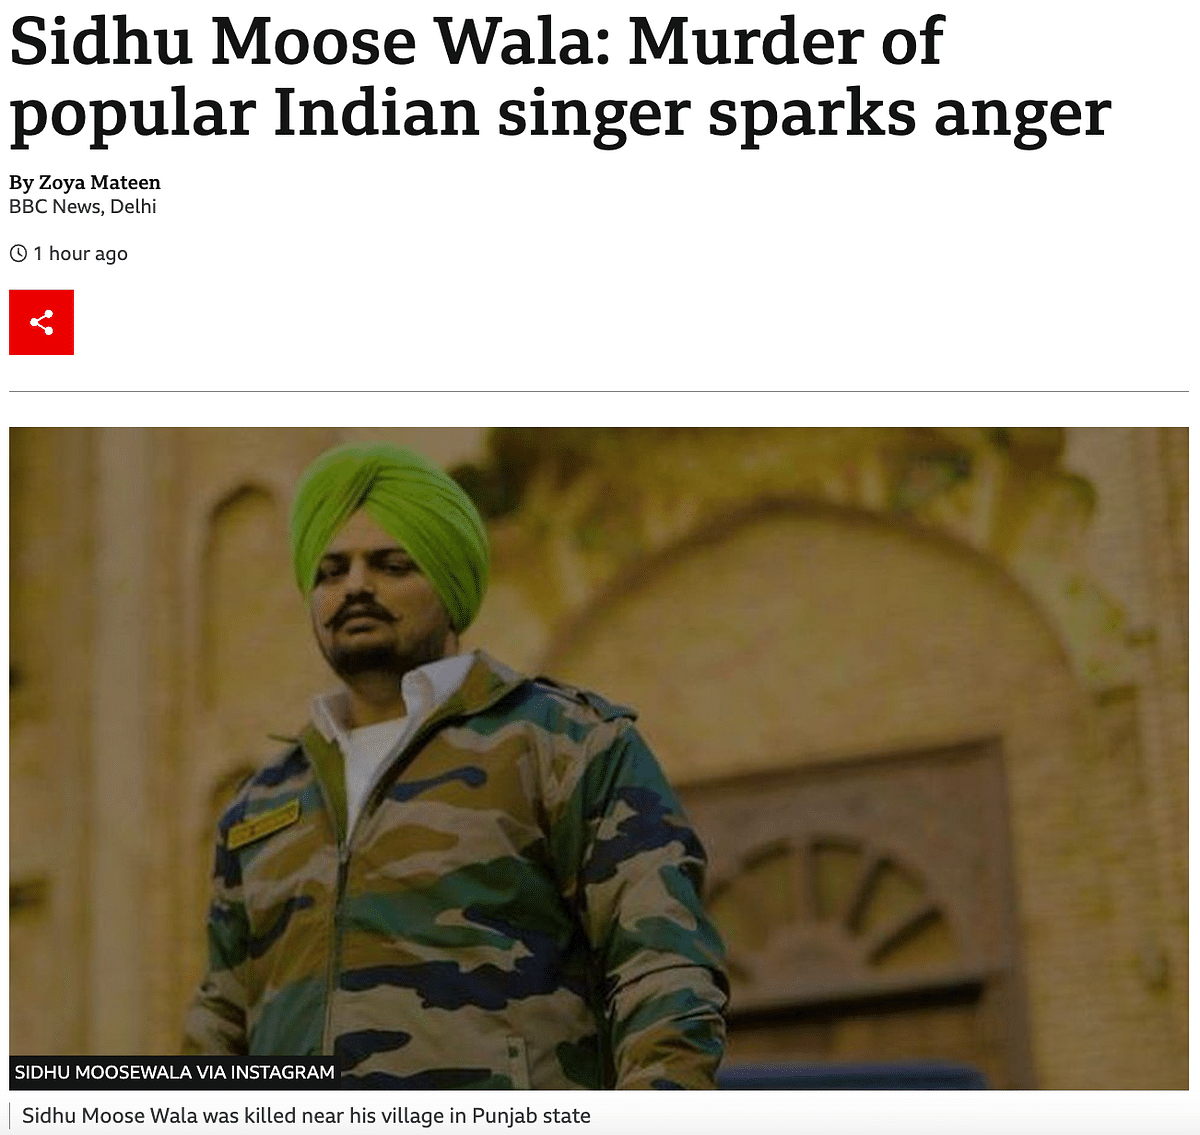 Gulf News wrote that "the popular Punjabi singer-actor-politician commanded a cult following that few could match."